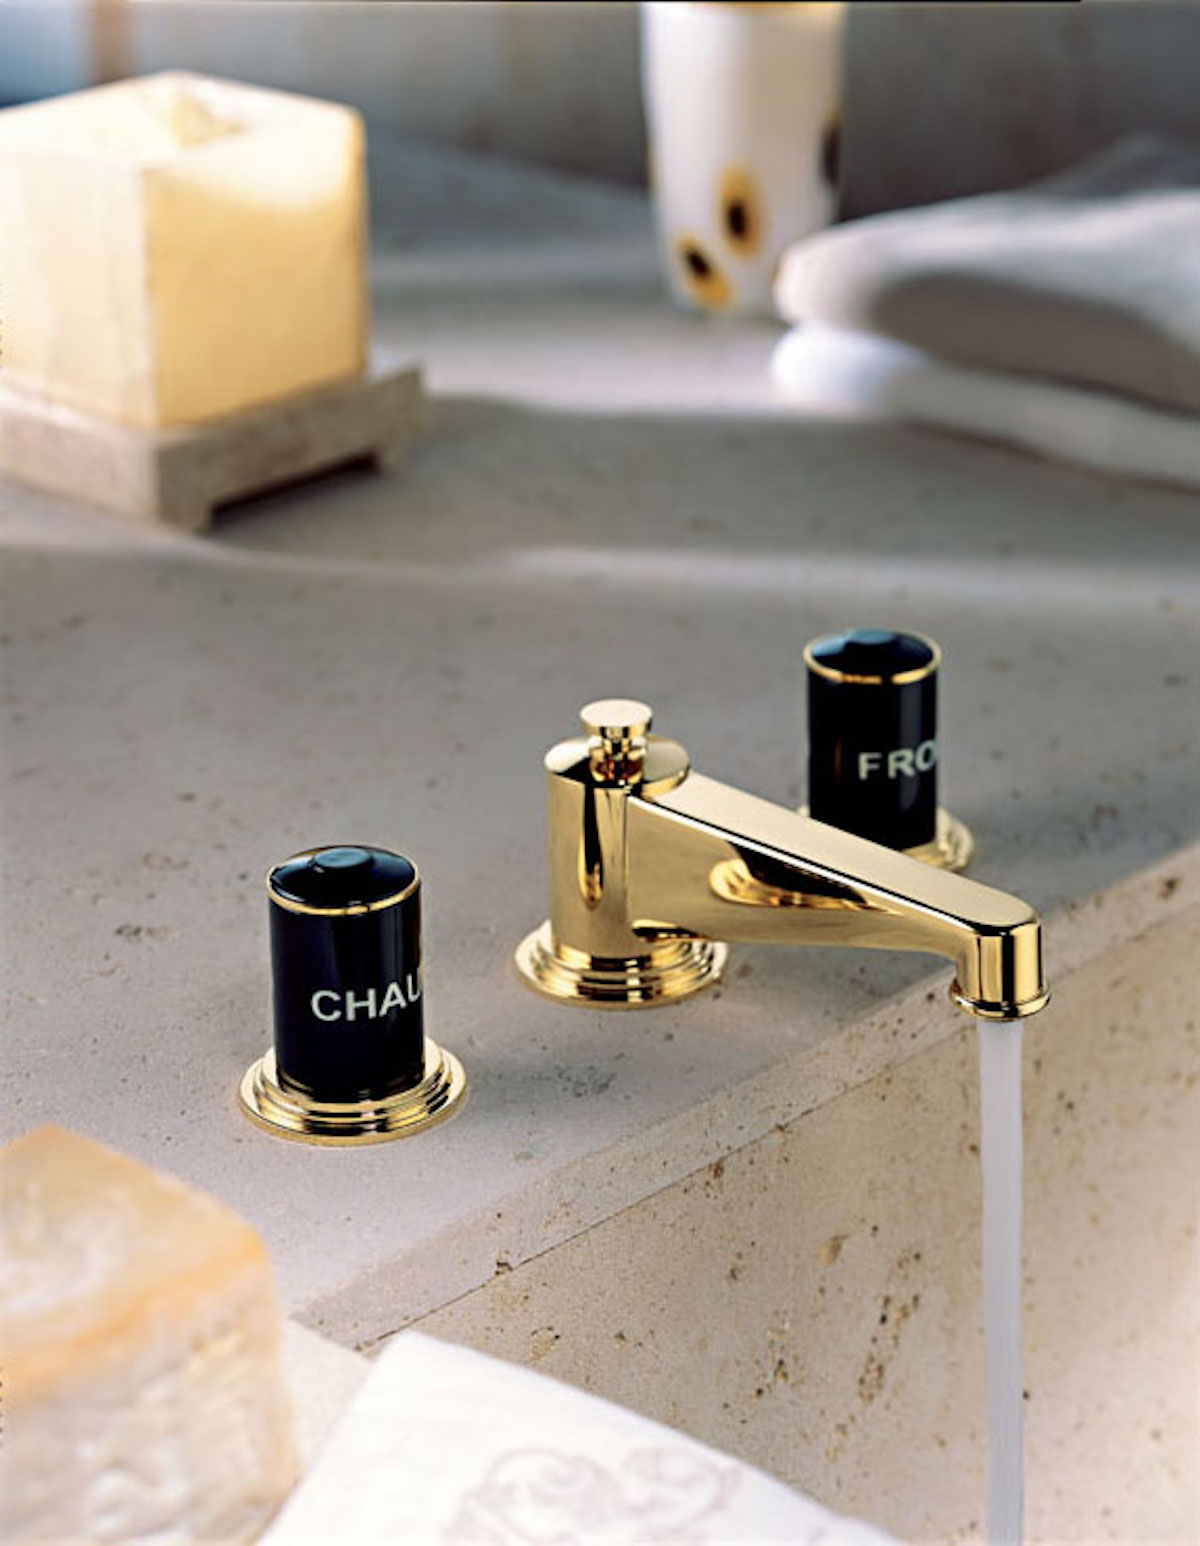 luxury kwc faucet at the immerse kitchen and bathroom showroom